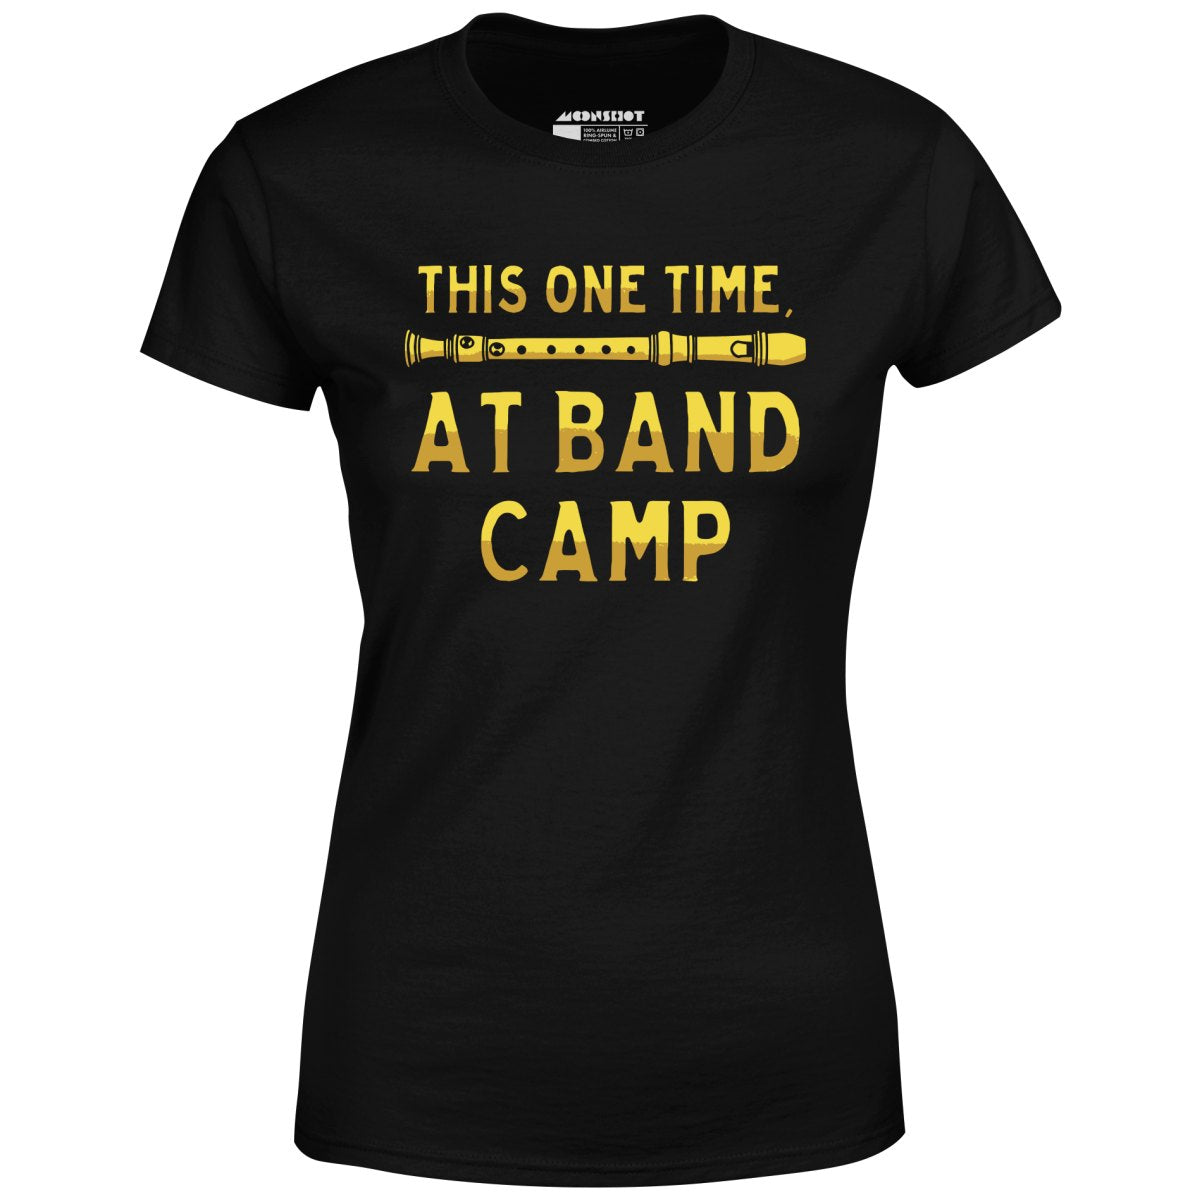 This One Time, at Band Camp - Women's T-Shirt